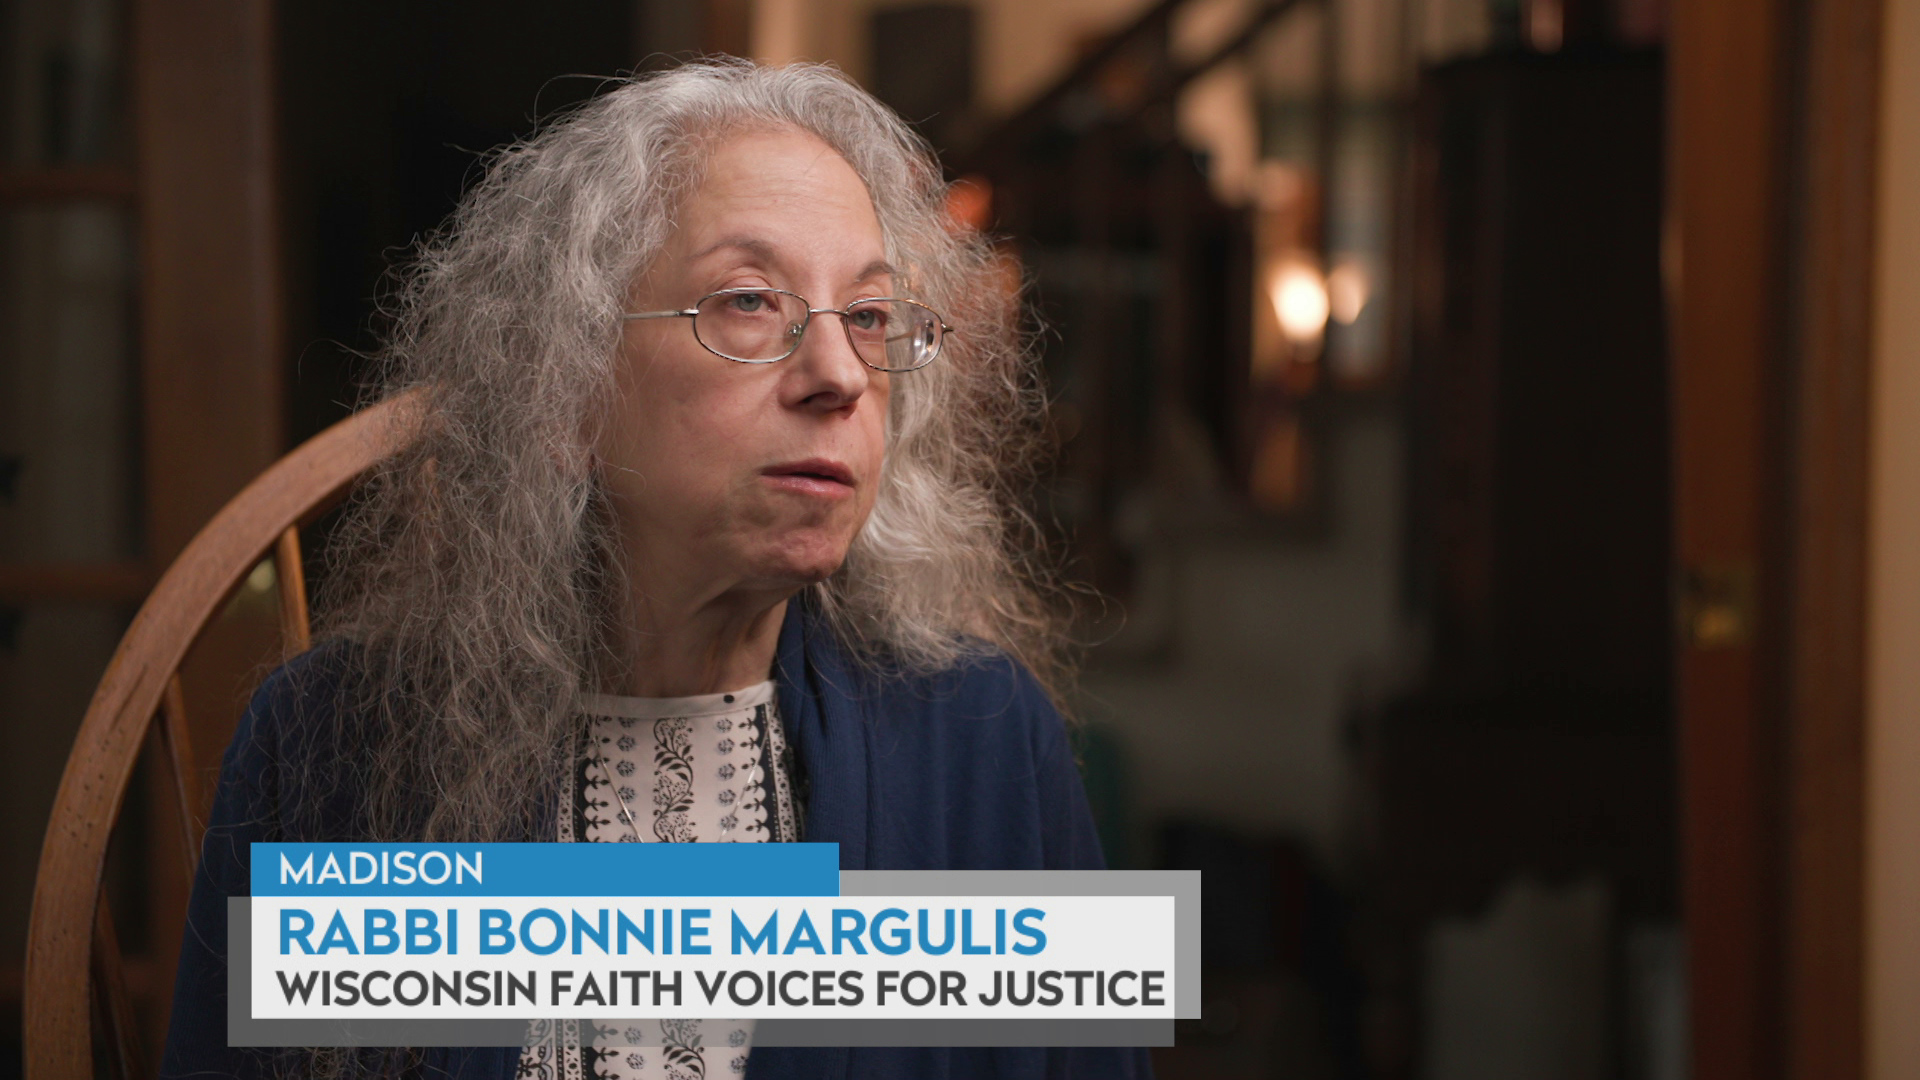 Bonnie Margulis sits on a chair with open double doors and a stairway in the background, with a graphic at bottom reading "Madison," "Rabbi Bonnie Margulis," and "Wisconsin Faith Voices for Justice."